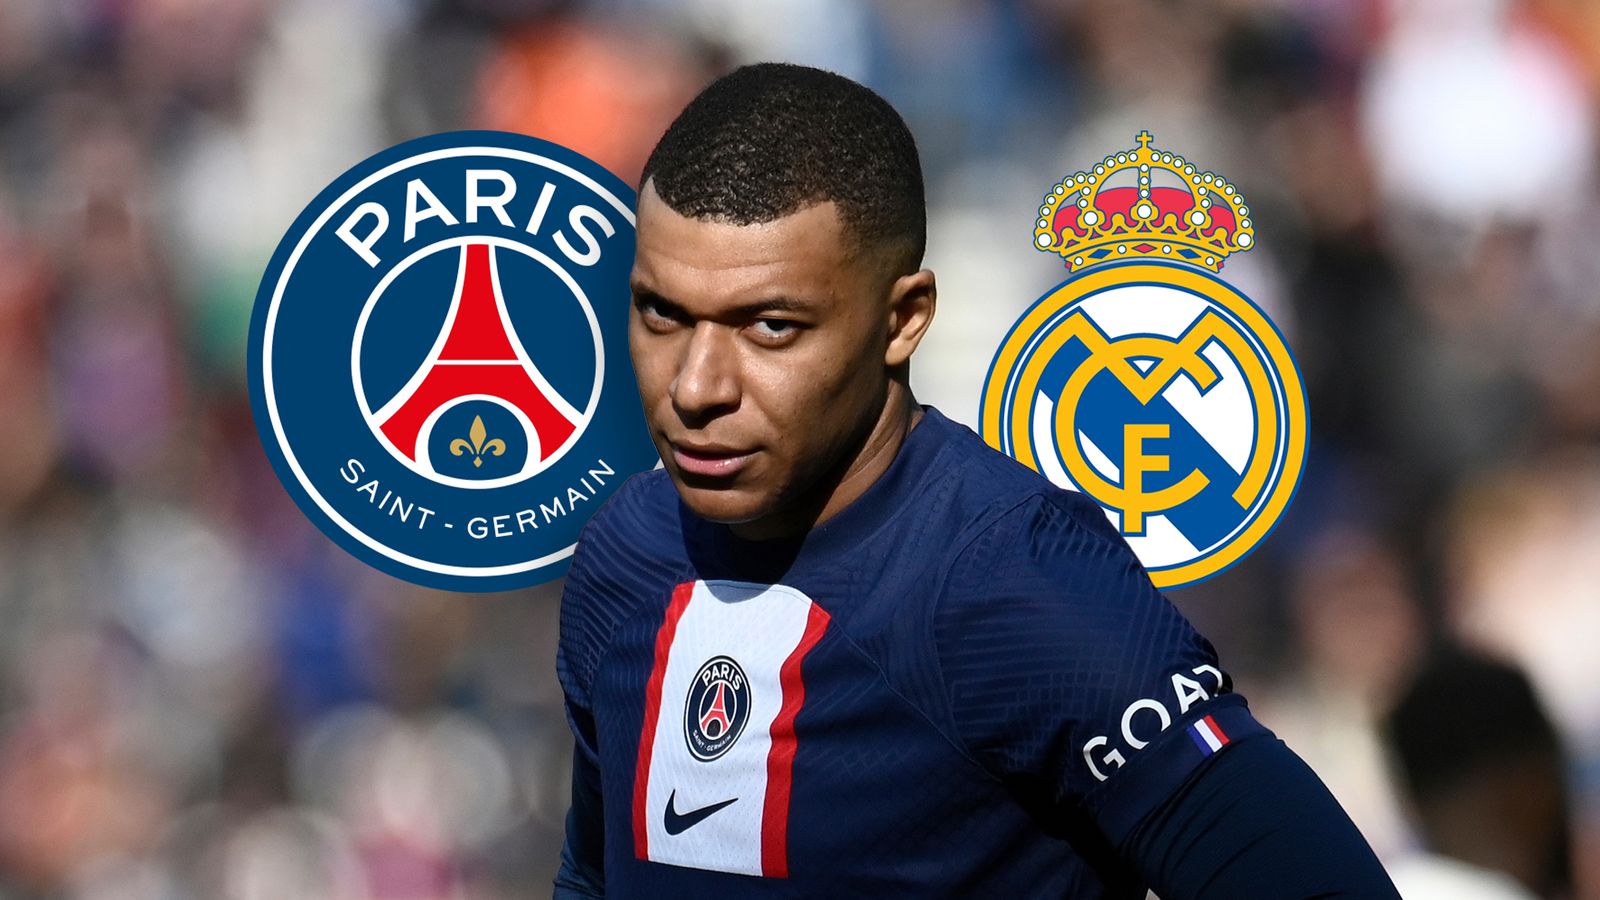 Kylian Mbappe's Unexpected Halftime Exit Sparks Debate Among PSG Fans